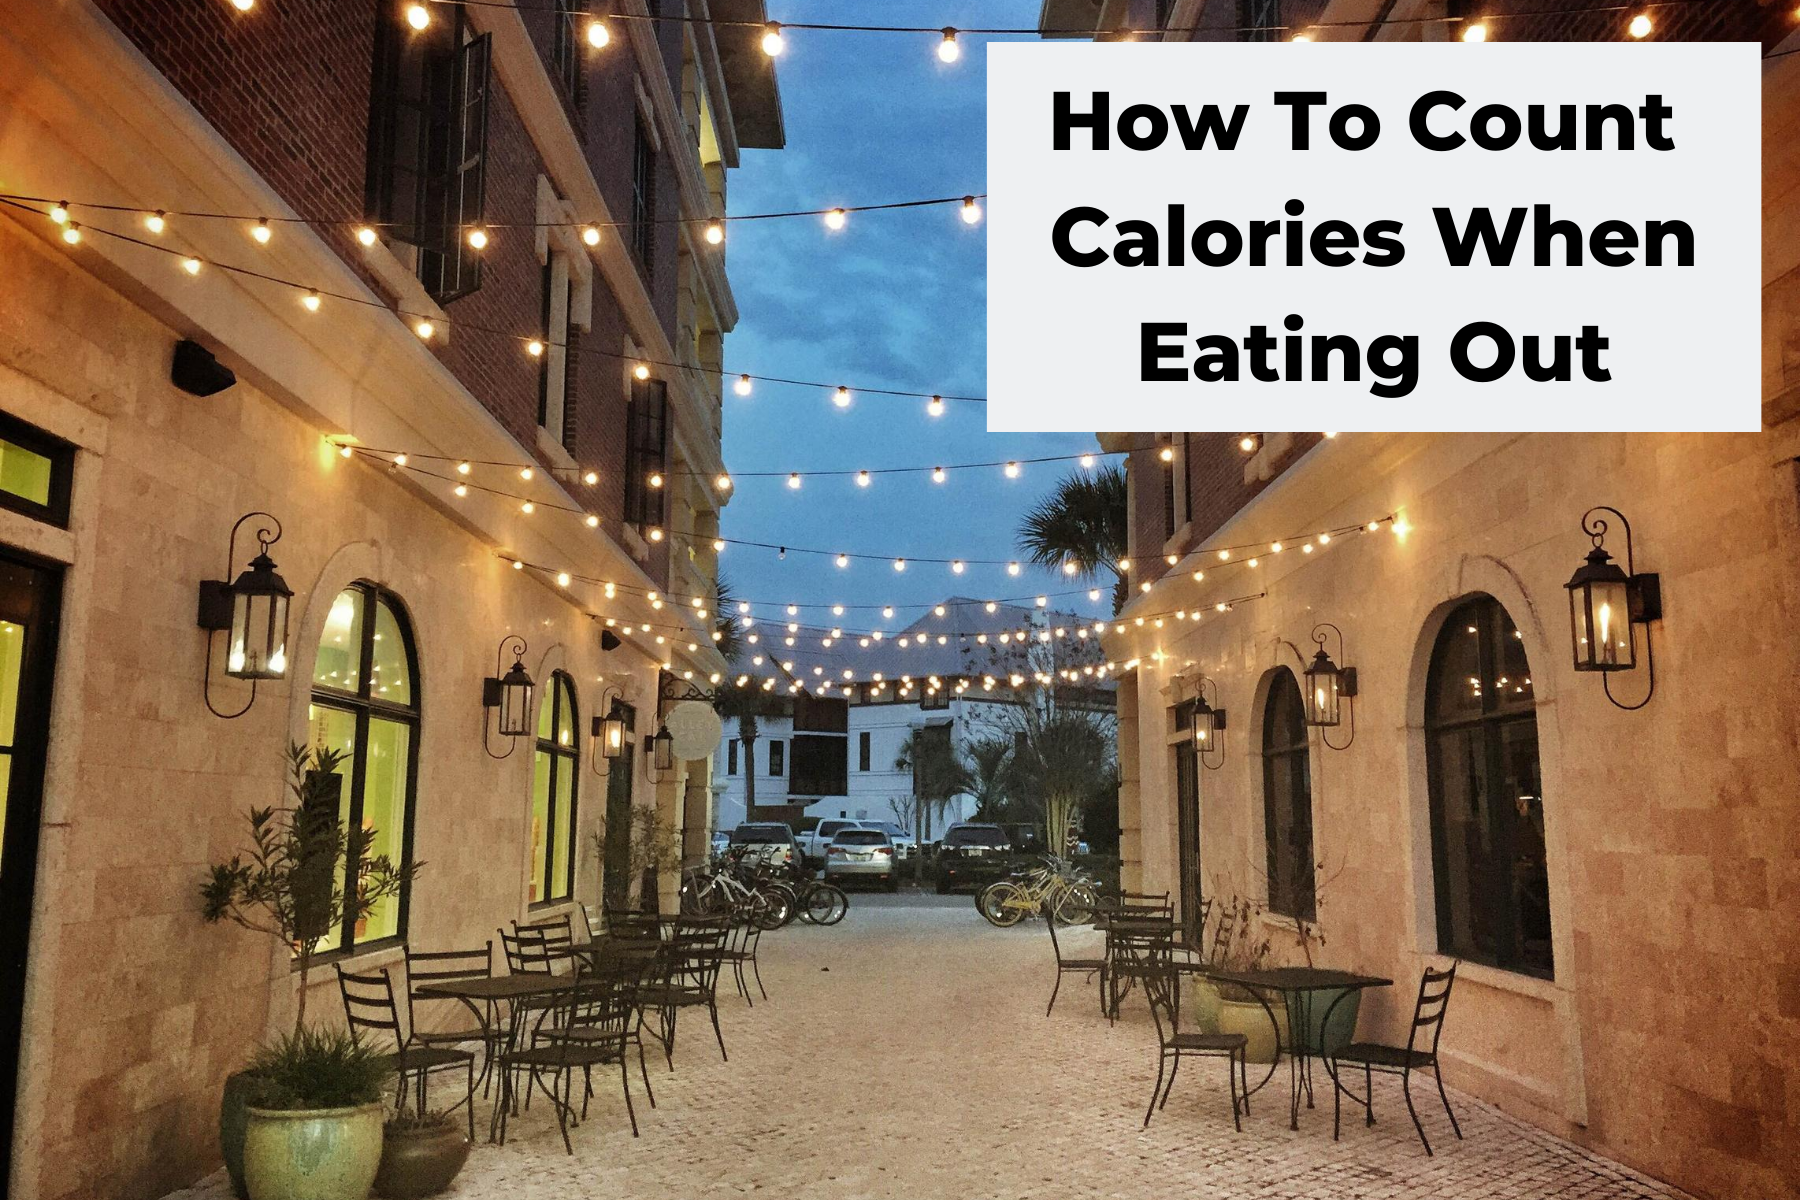 Count calories when eating out